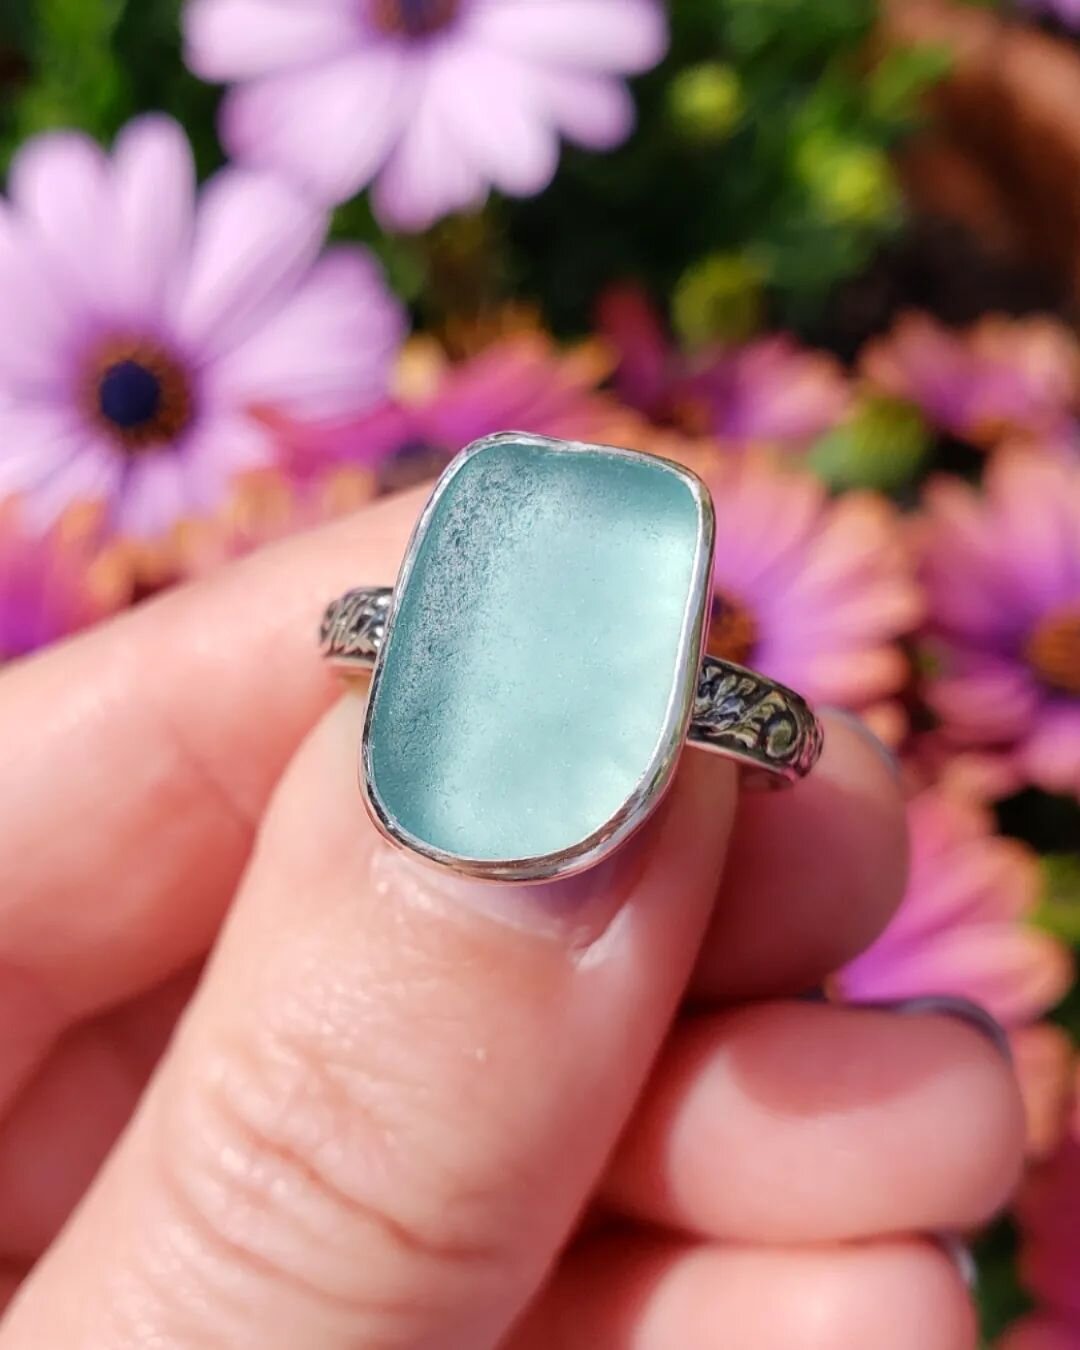 Just a reminder that I have a new batch of seaglass rings available at 6pm tonight 🤍 

Buy them here --&gt; www.mountainbeachfit.com 

Link in bio

#seaglass #jewelry #seaglassjewelry #seaglassring #sterlingsilver #handmade #silversmith #smallbusine